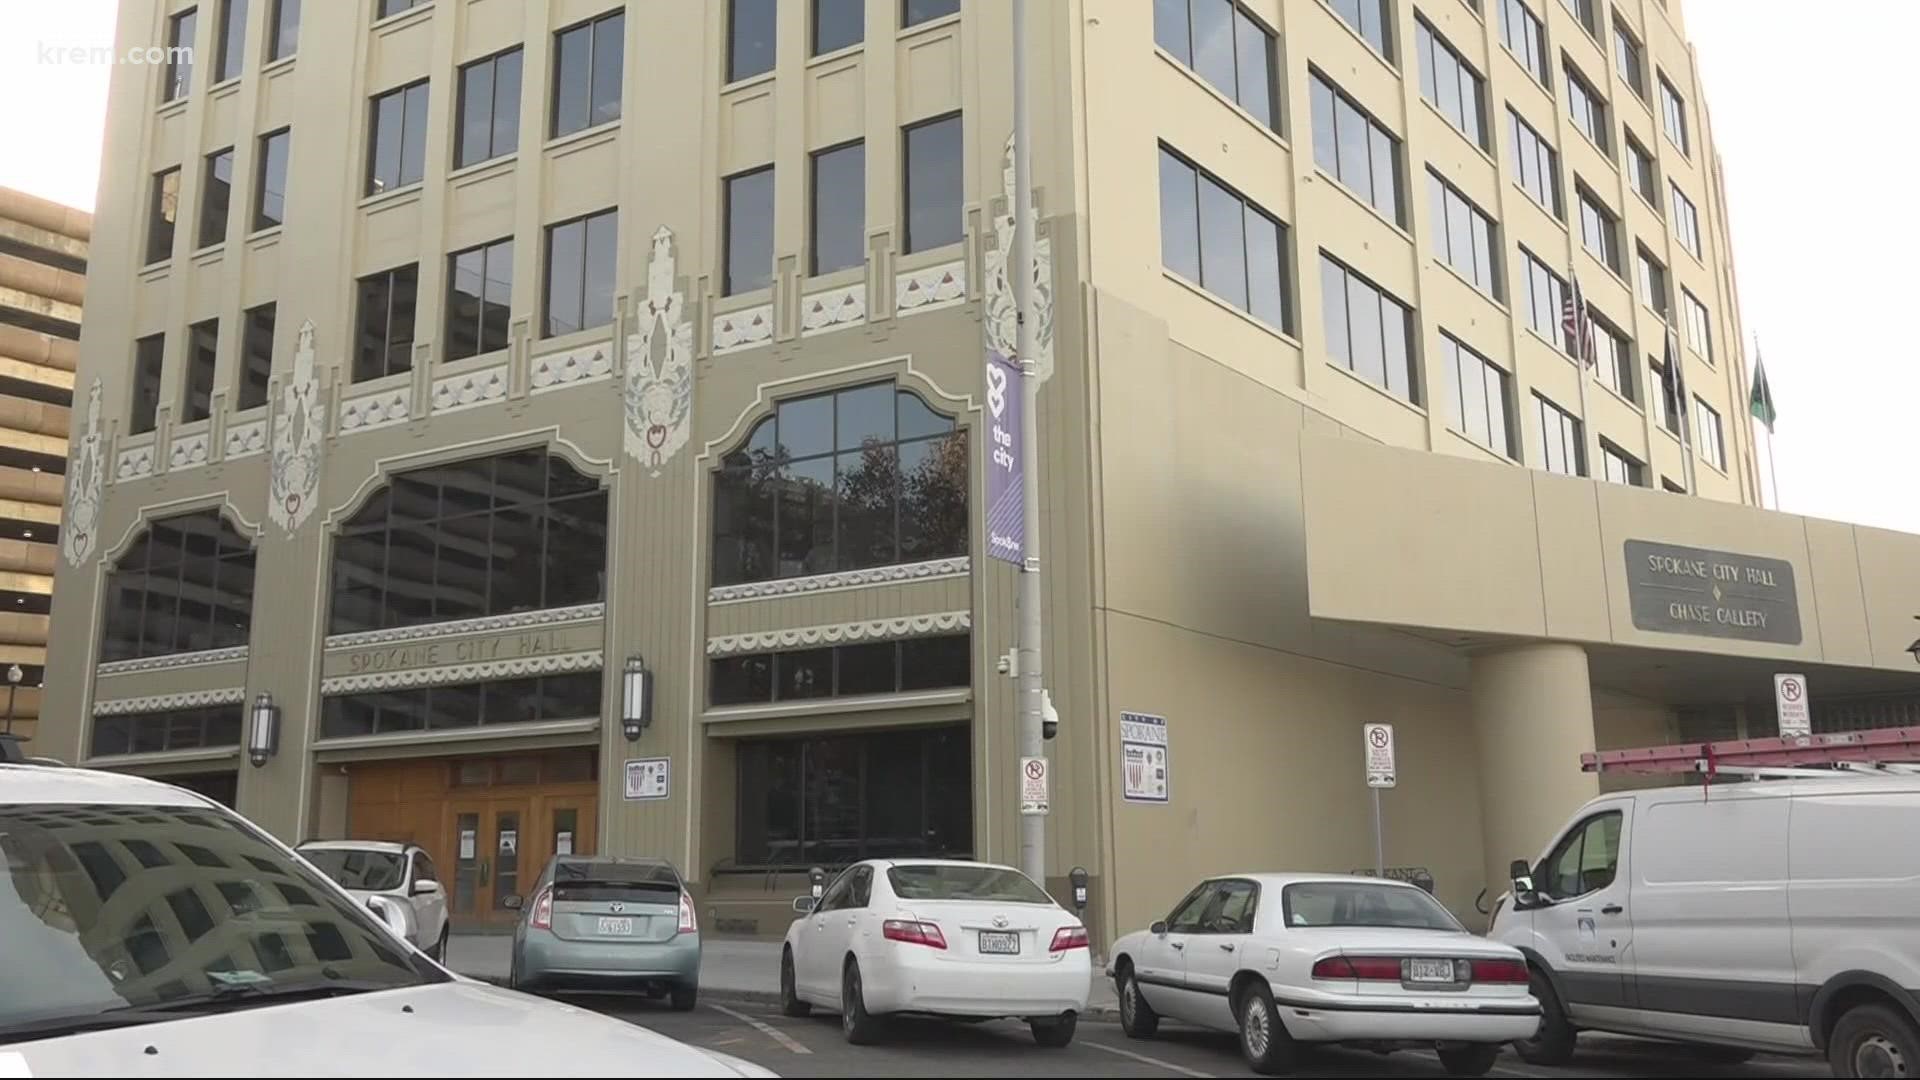 Spokane City Council announced the return to in-person meetings at City Hall starting Monday, March 14 after the end of the state mask mandate.